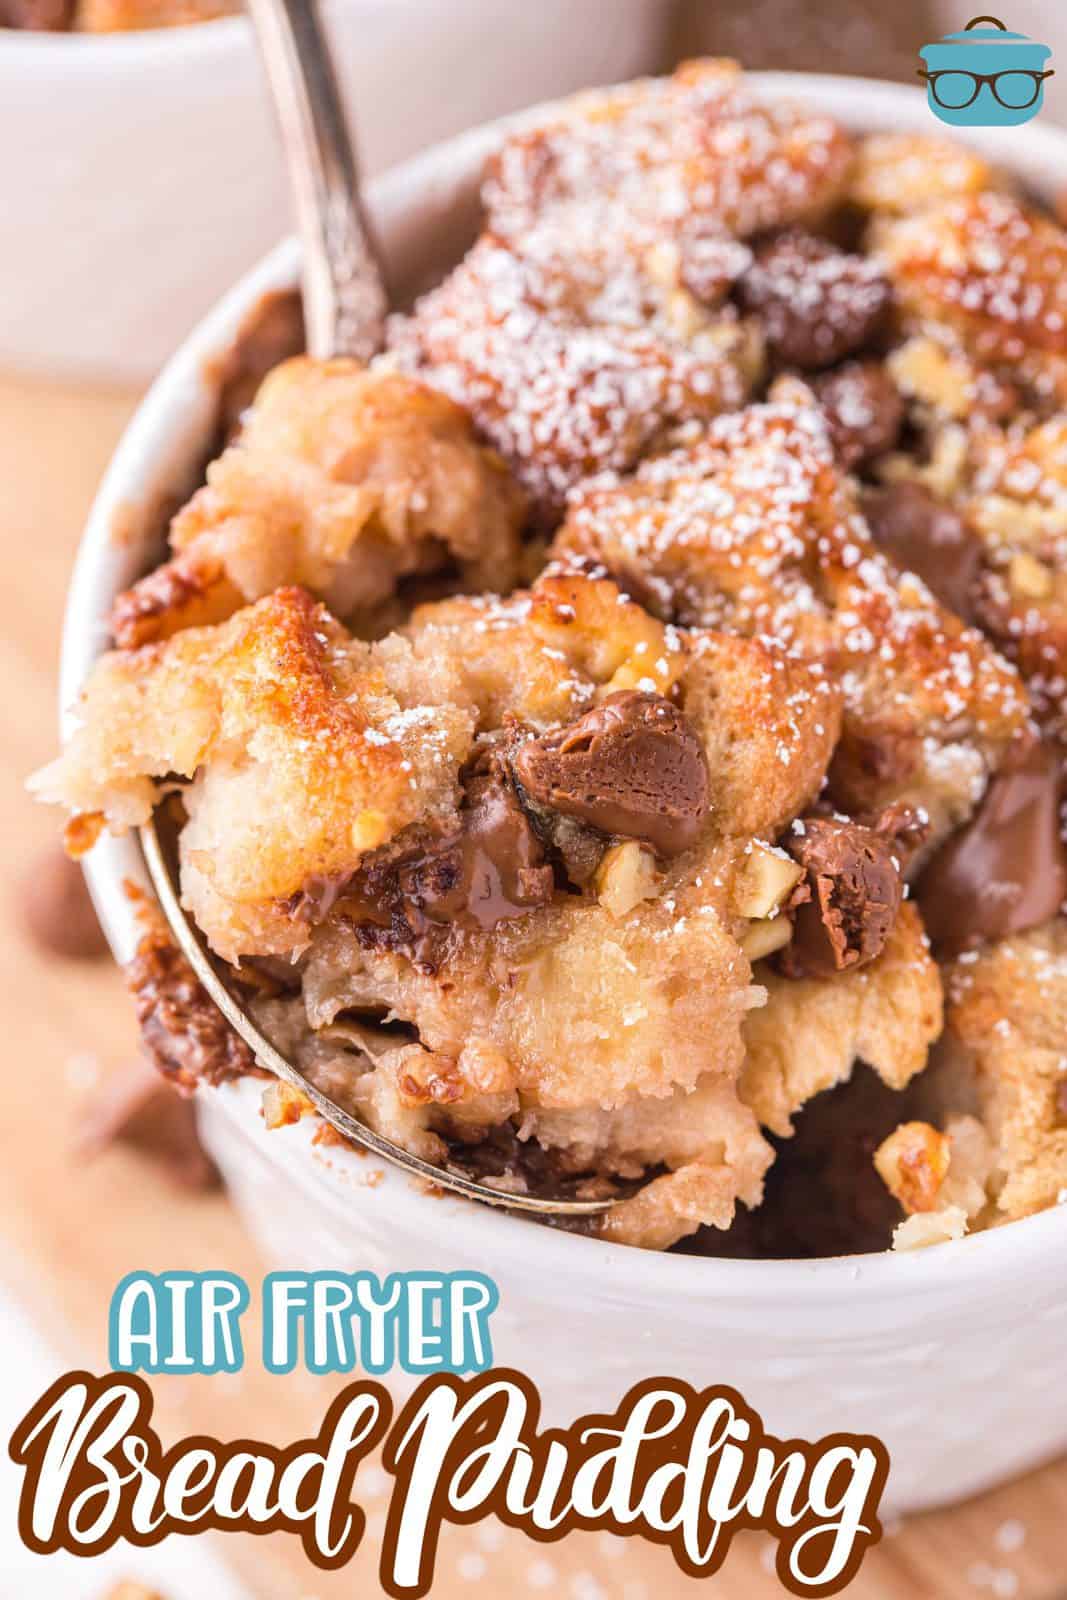 Pinterest image close up of Air Fryer Bread Pudding with some on spoon.